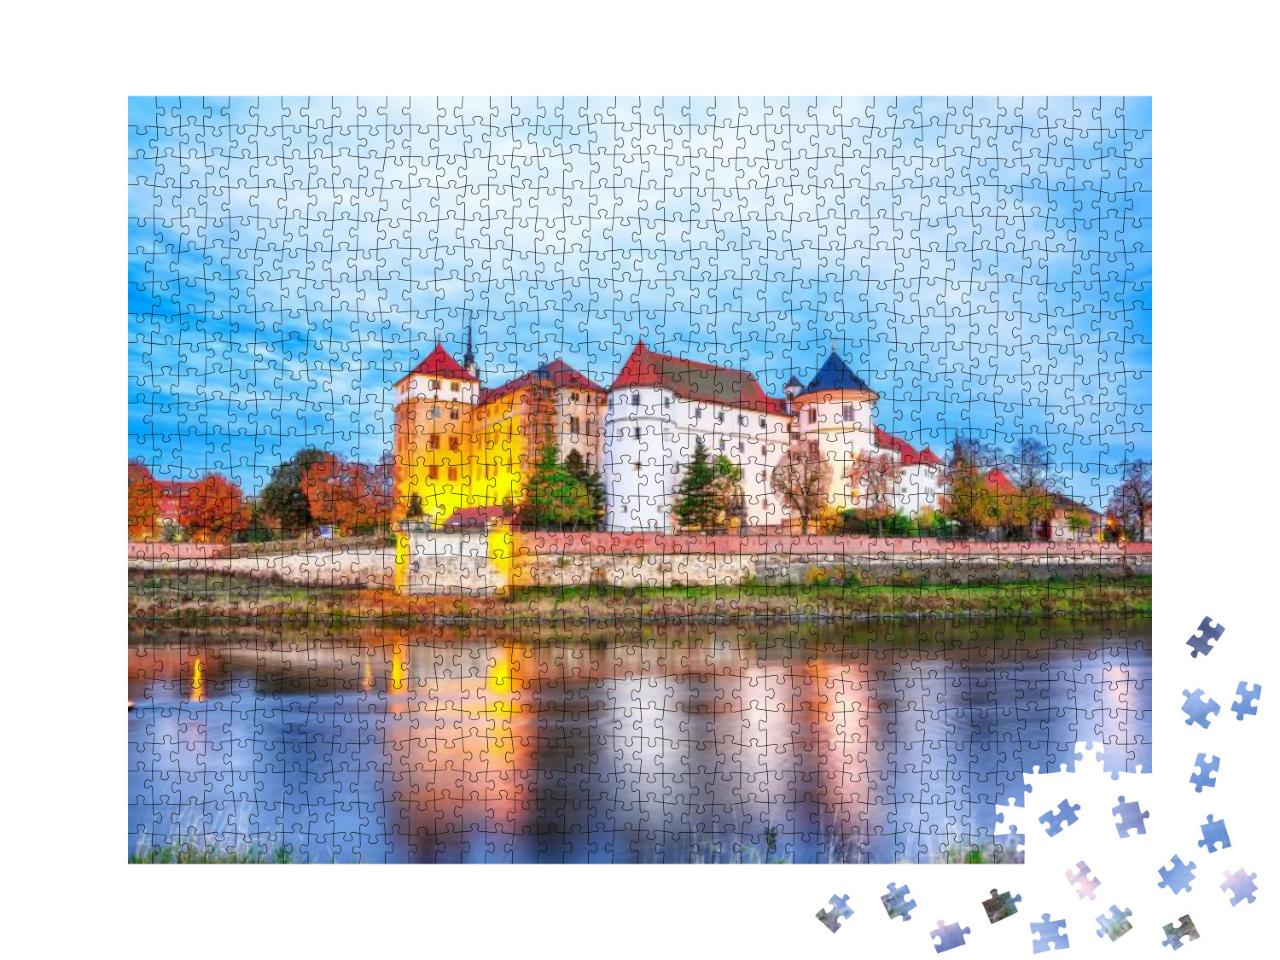 Picturesque Morning View of Hartenfels Castle on Banks of... Jigsaw Puzzle with 1000 pieces